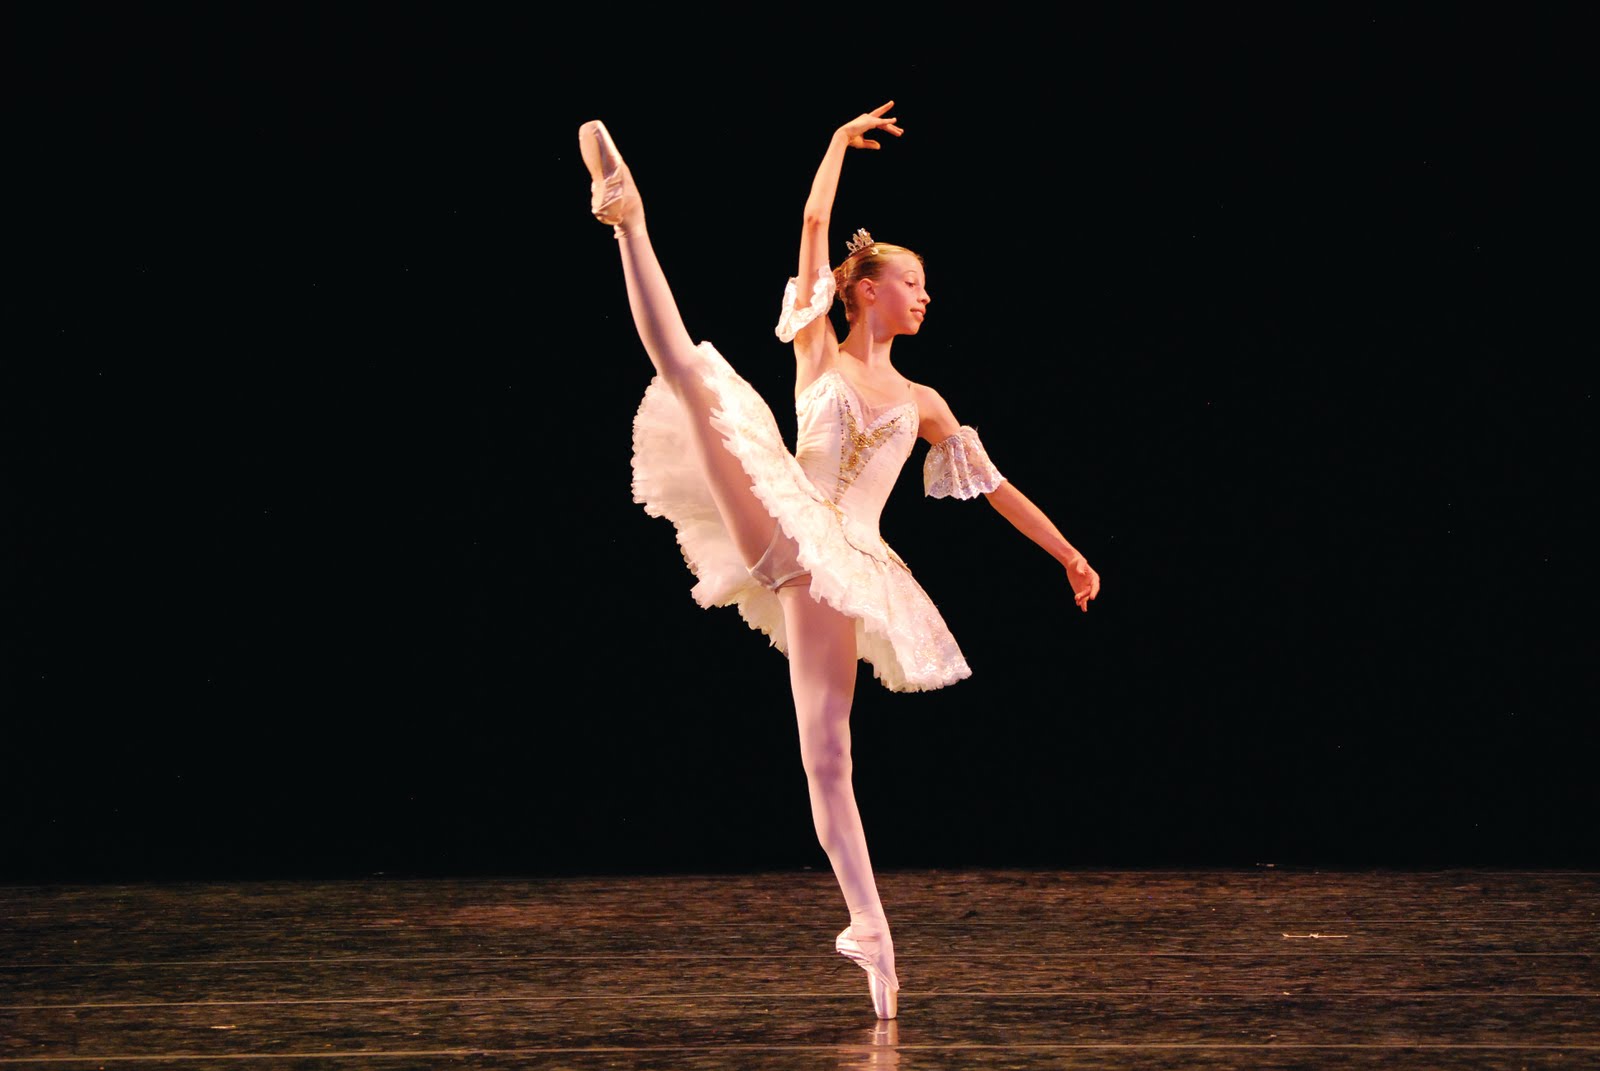 Ballet Background Image Gallery